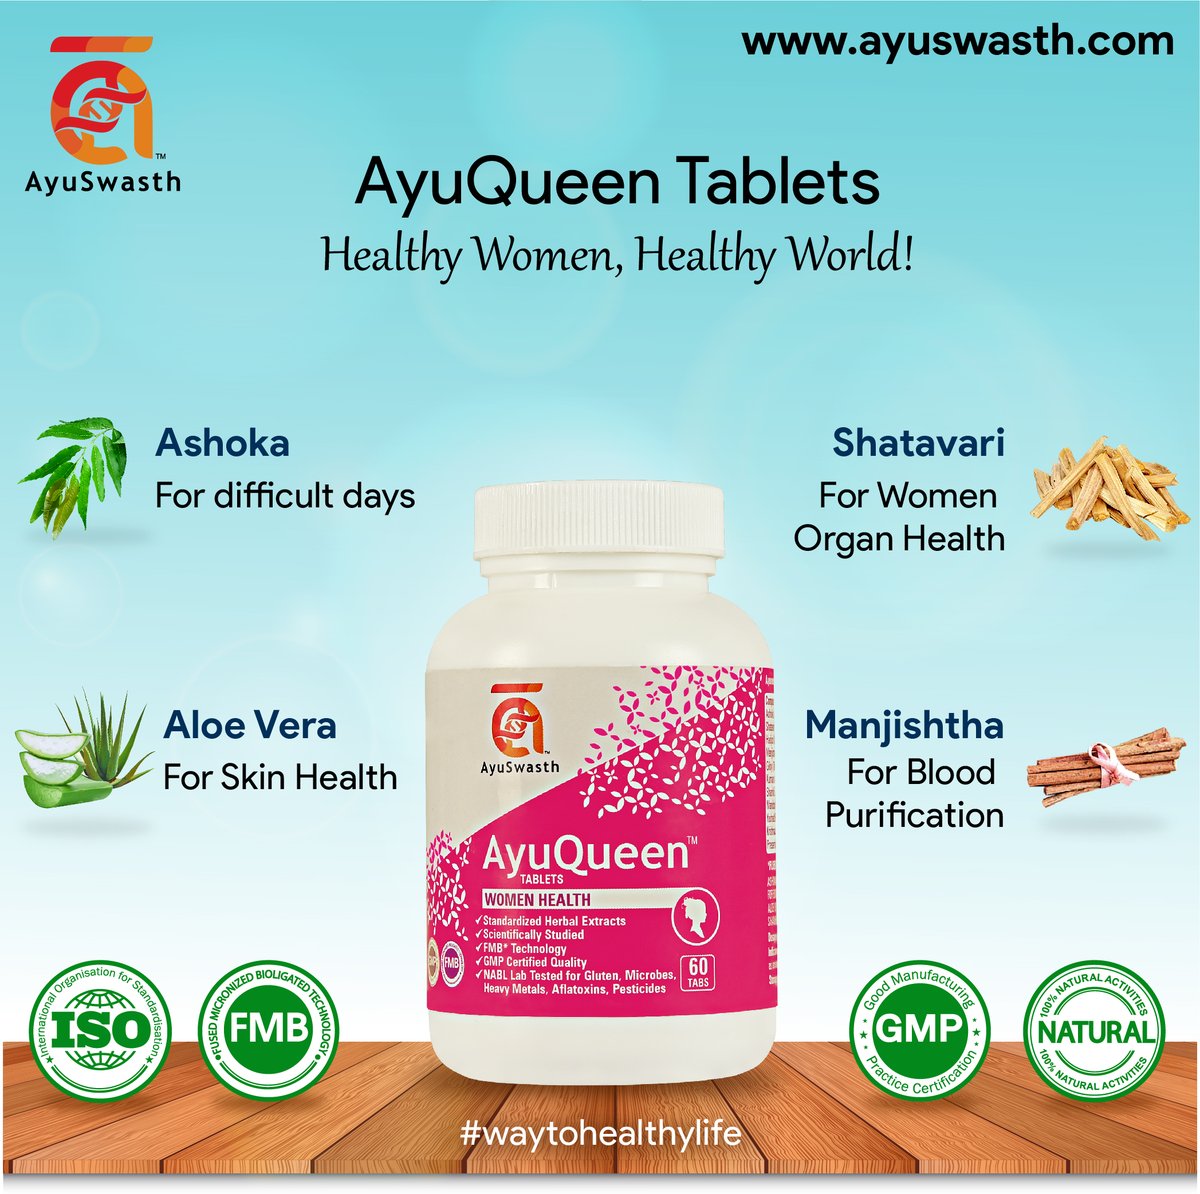 AyuQueen Women Health Tablets!
Healthy Women, Healthy World!
ayuswasth.com

#ayuswasth #ayuqueen #womenhealth #womenshealth #ayurvedictablets #herbaltablets #stayfit #herbalhealthcare #health #ayurvedic #ayurveda #healthproducts #ayurvedalifestyle